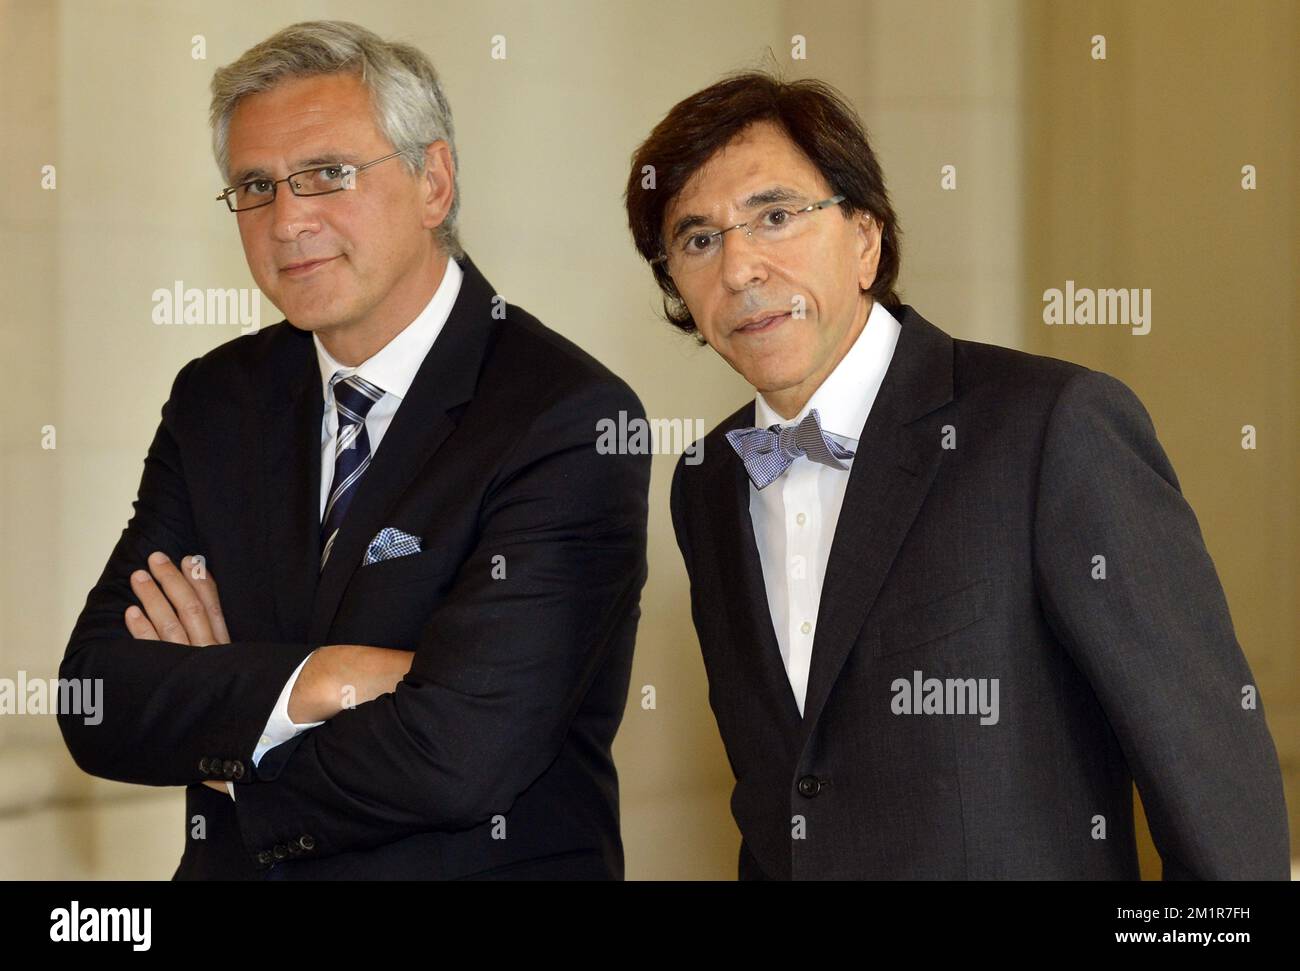 Flemish Minister-President Kris Peeters Belgian and Prime Minister Elio Di Rupo pictured during a reception at the royal castle in Laeken - Laken, Brussels for the Minister-Presidents of the regions and communities during the reign of King Albert II of Belgium, Friday 12 July 2013.  Stock Photo